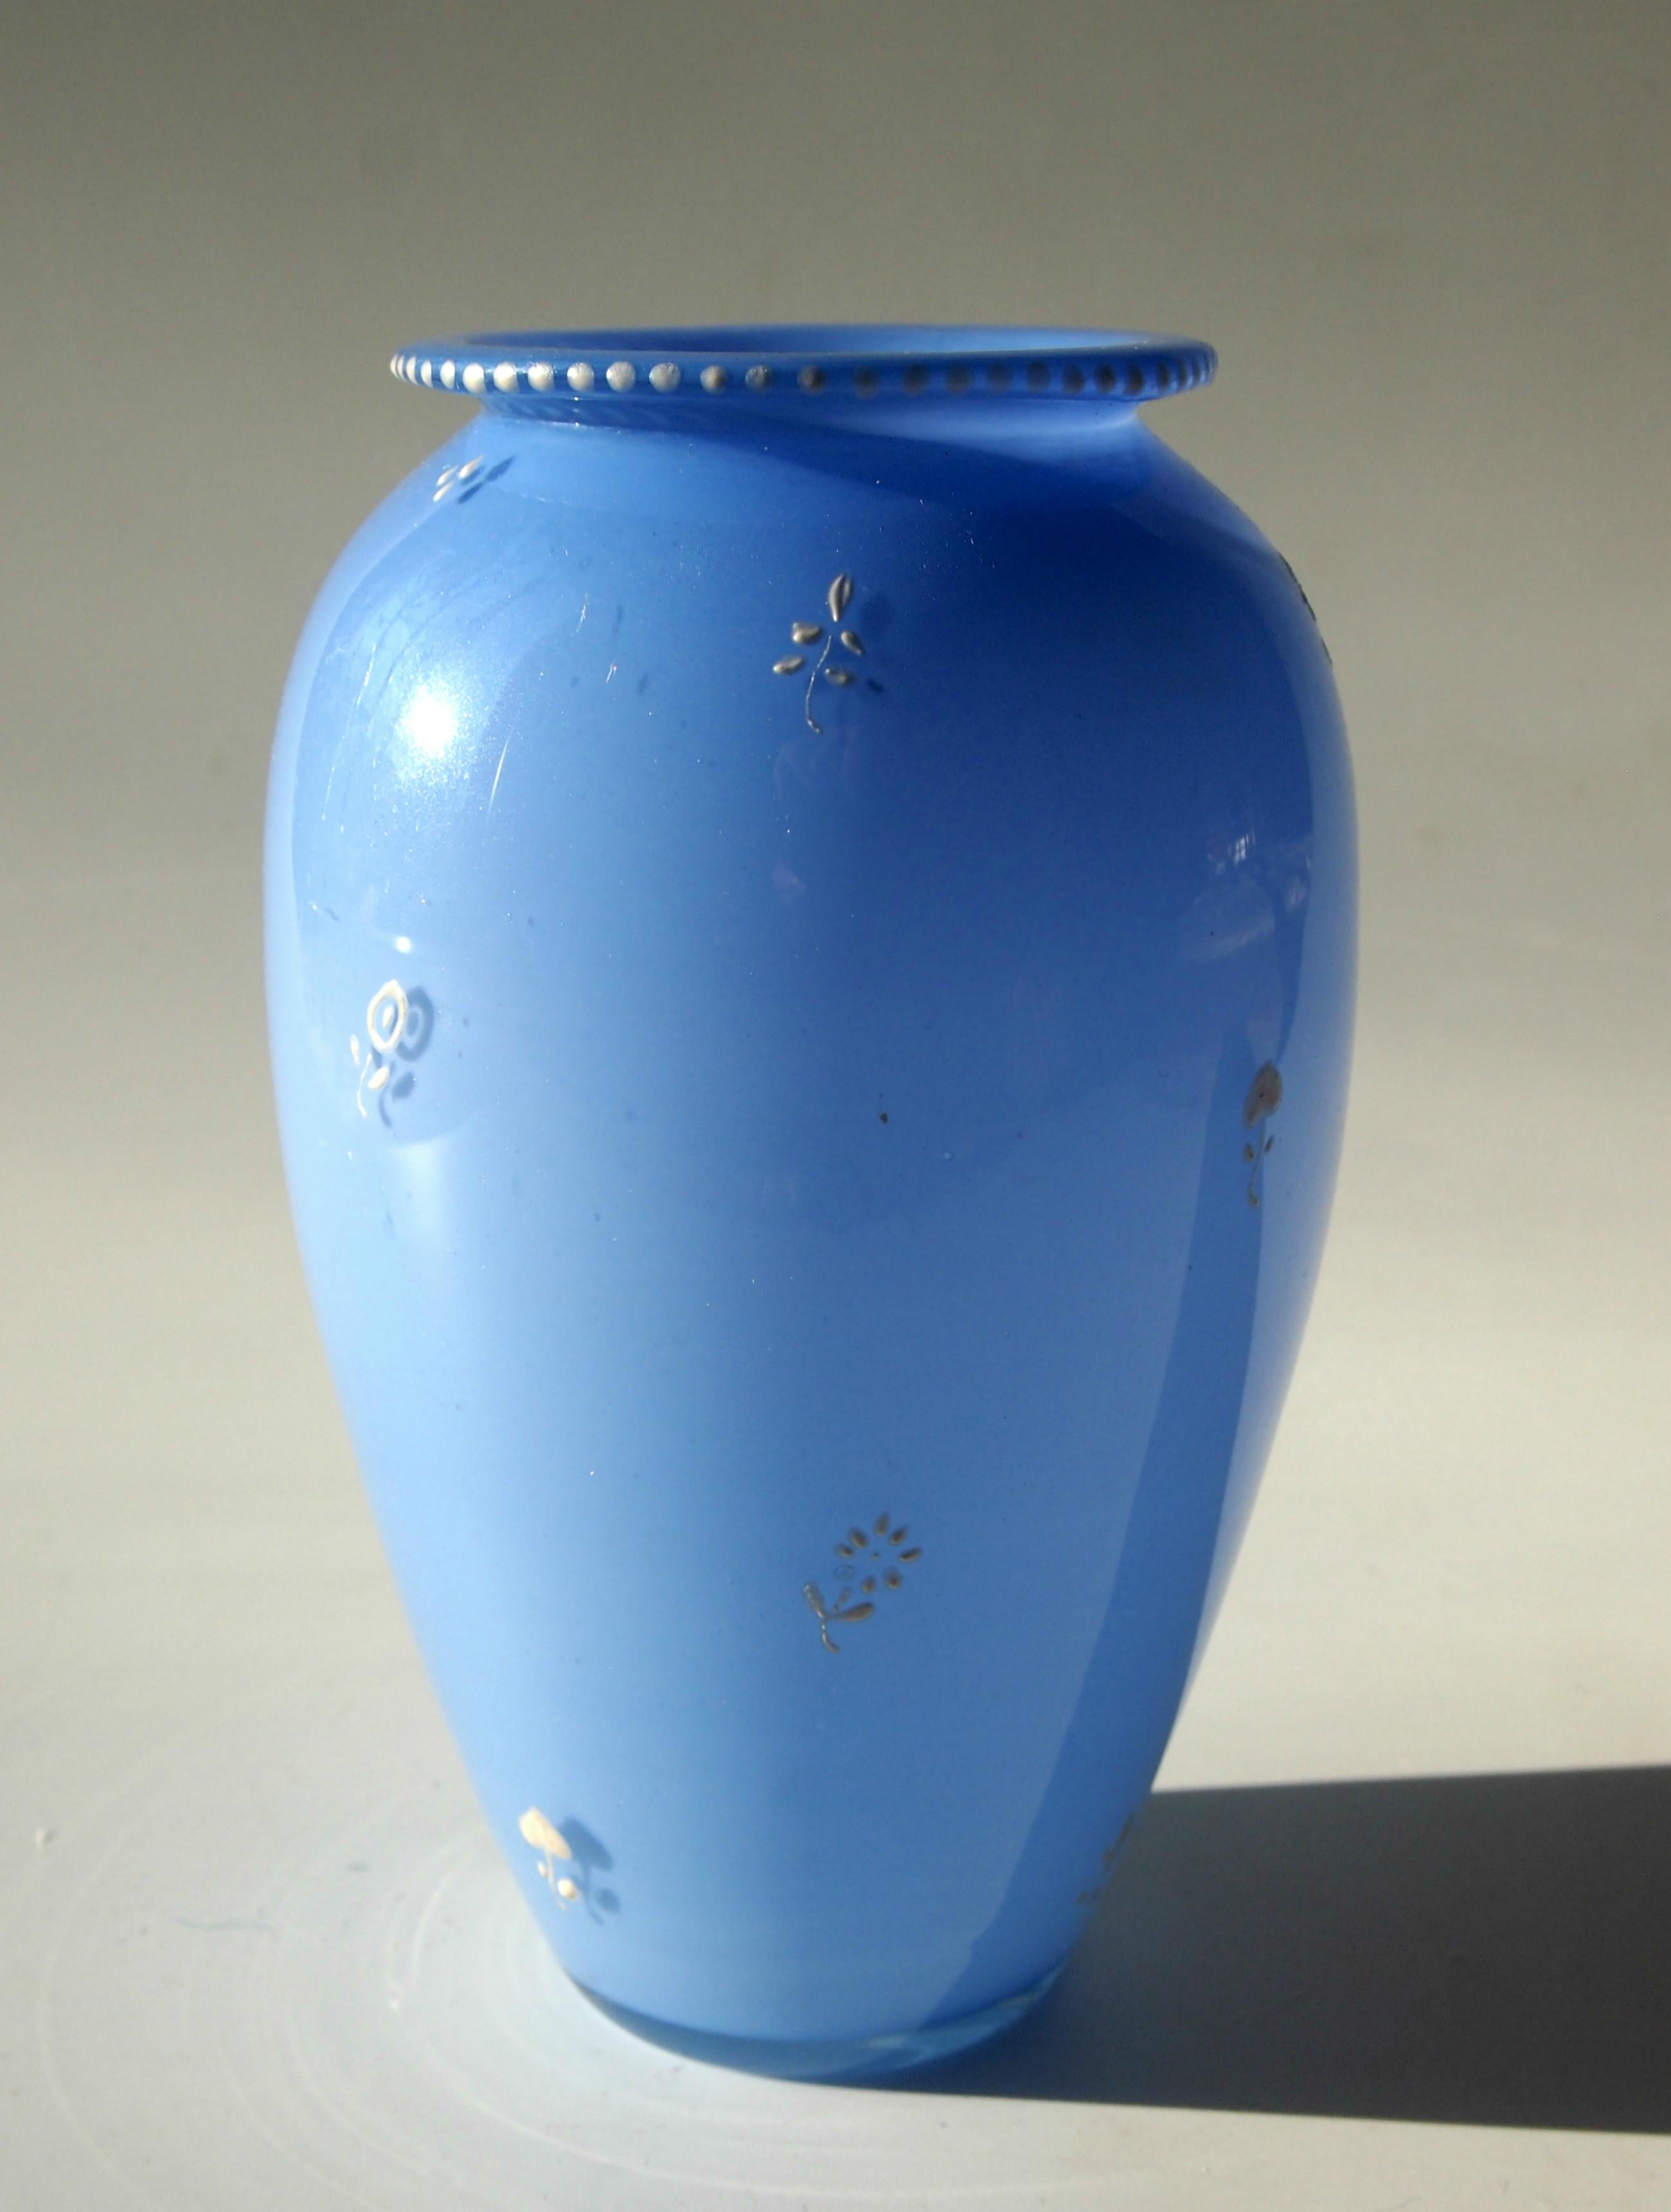 Rare blue tango vase by Loetz enameled in white and designed by one of their greatest designers - Dagobert Peche. 

Loetz was by far the most important art glass house in the Bohemian region in the first quarter of the 20th century.

Dagobert